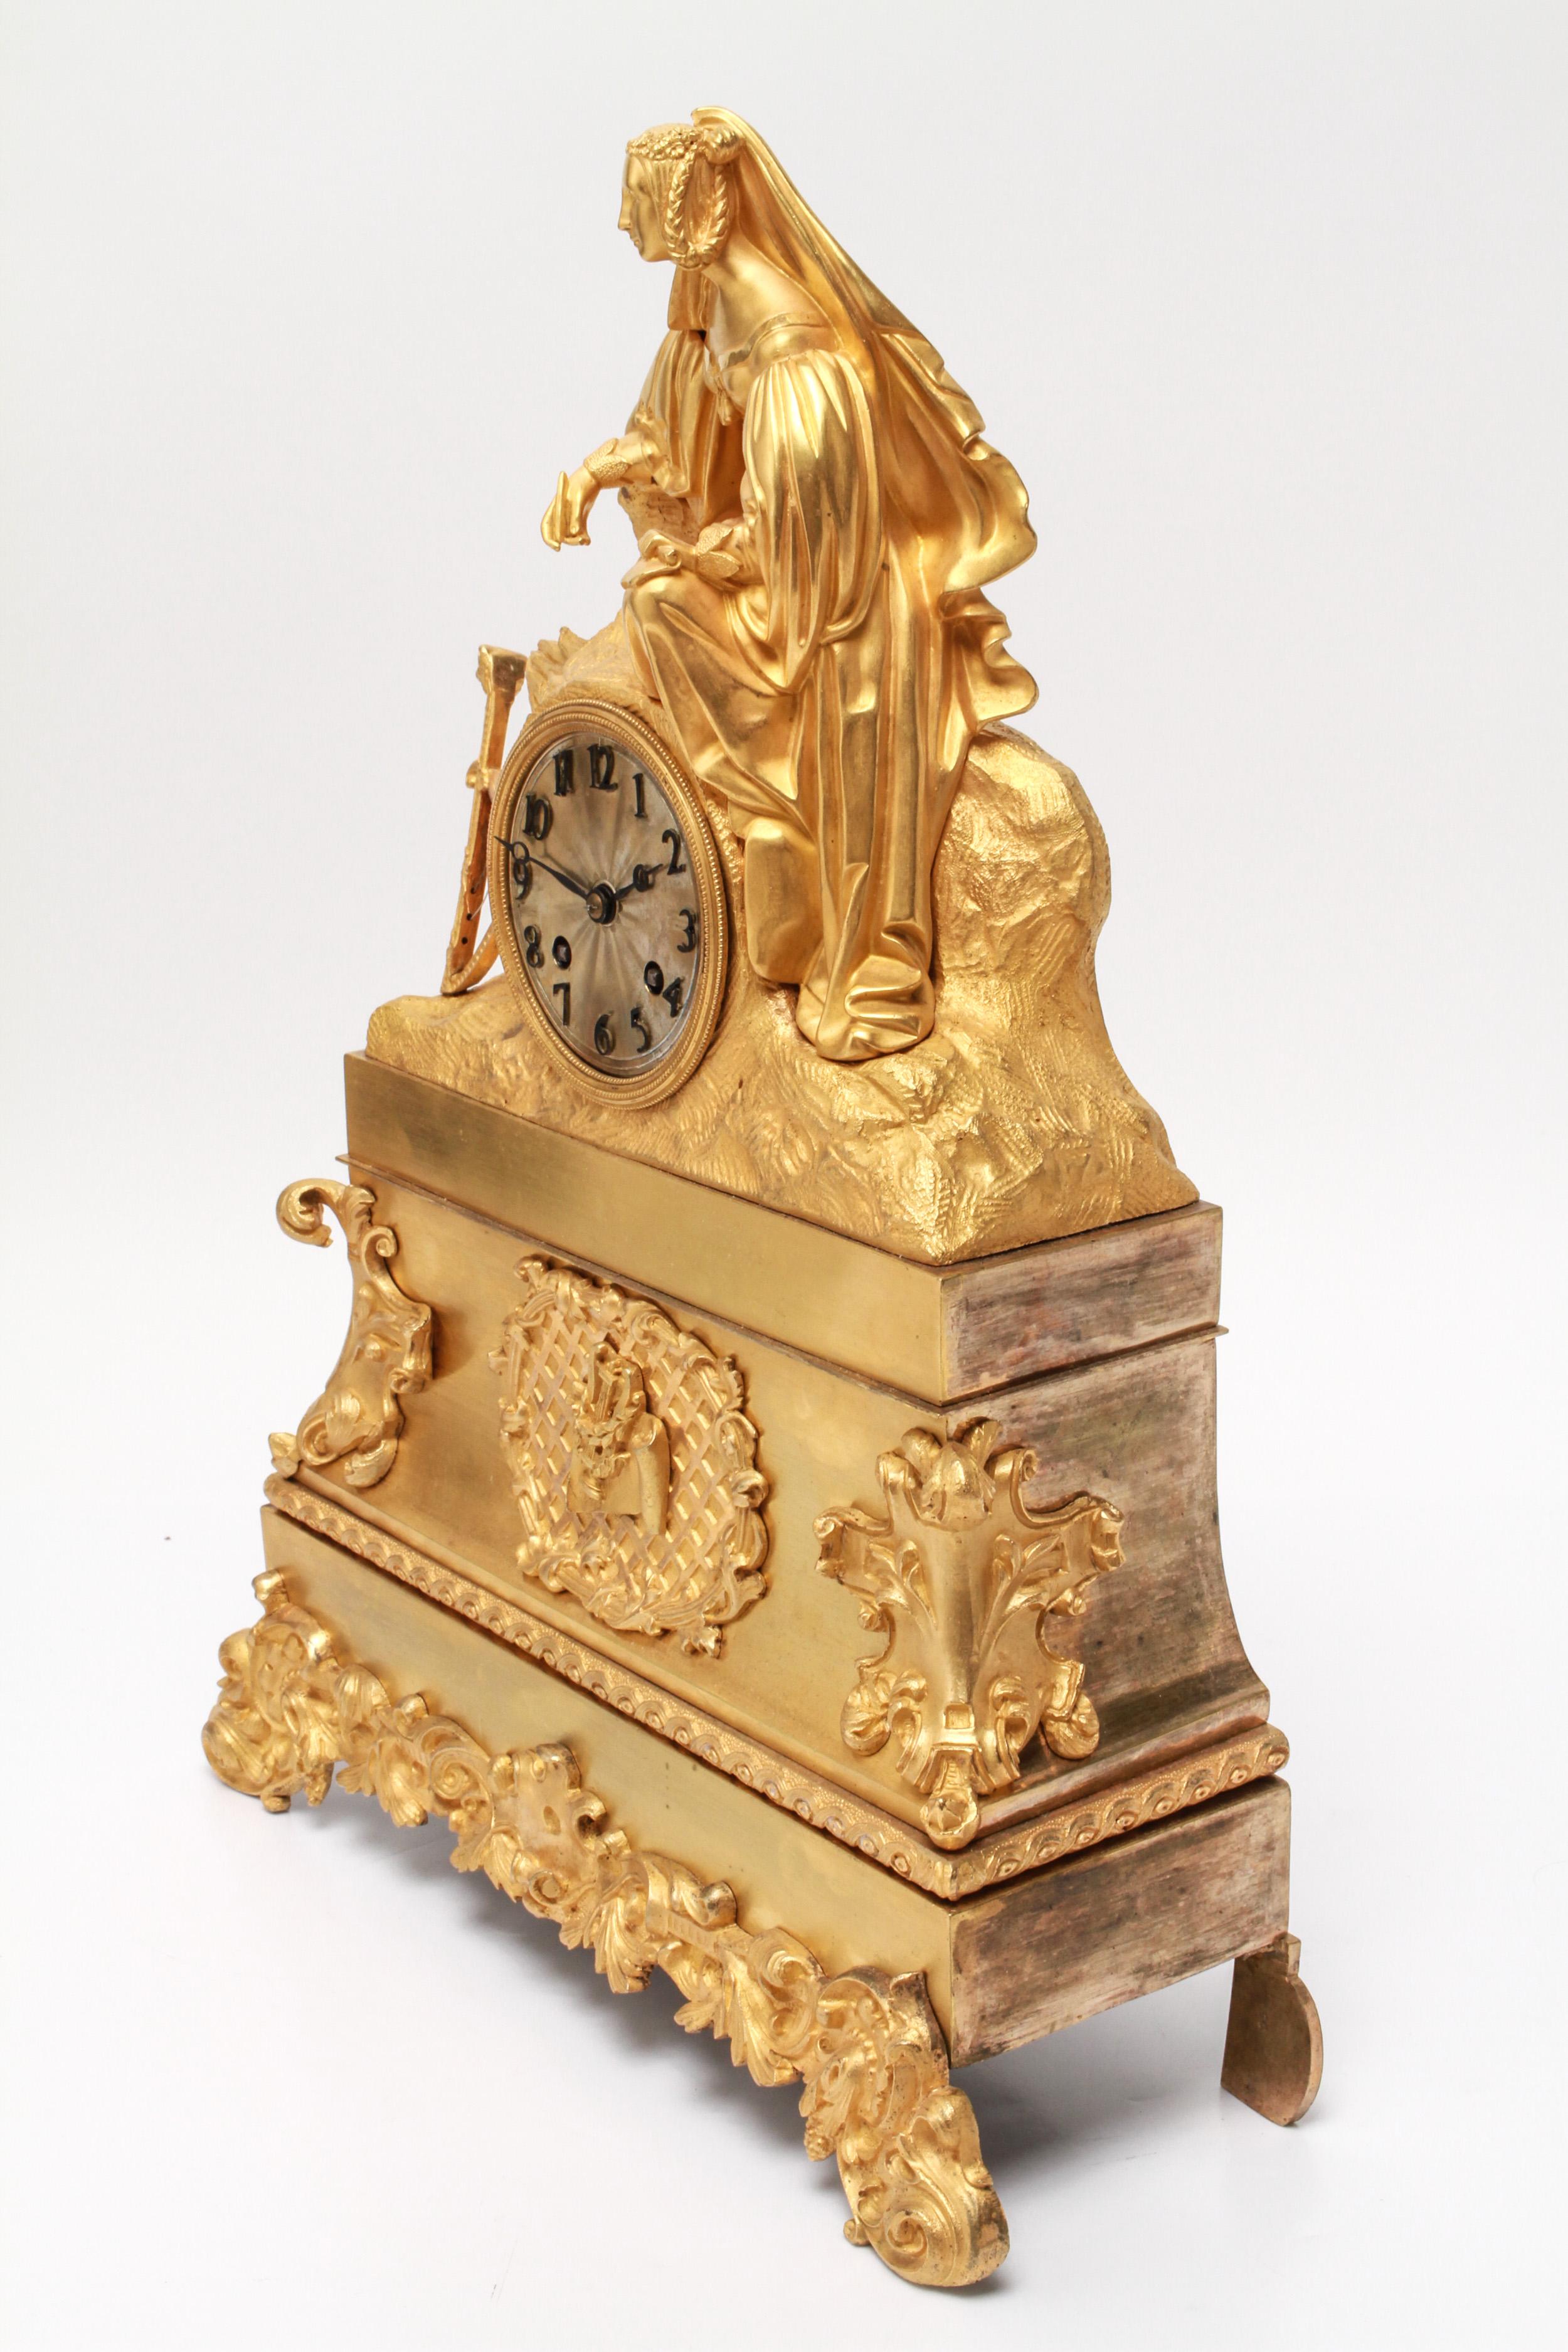 French neoclassical Revival gilt-bronze ormolu figural clock depicting a woman in fancy dress holding paper and pen with a propped hand-held harp. The piece has an engine-turned dial with applied Arabic numerals. Made during the 19th century. In